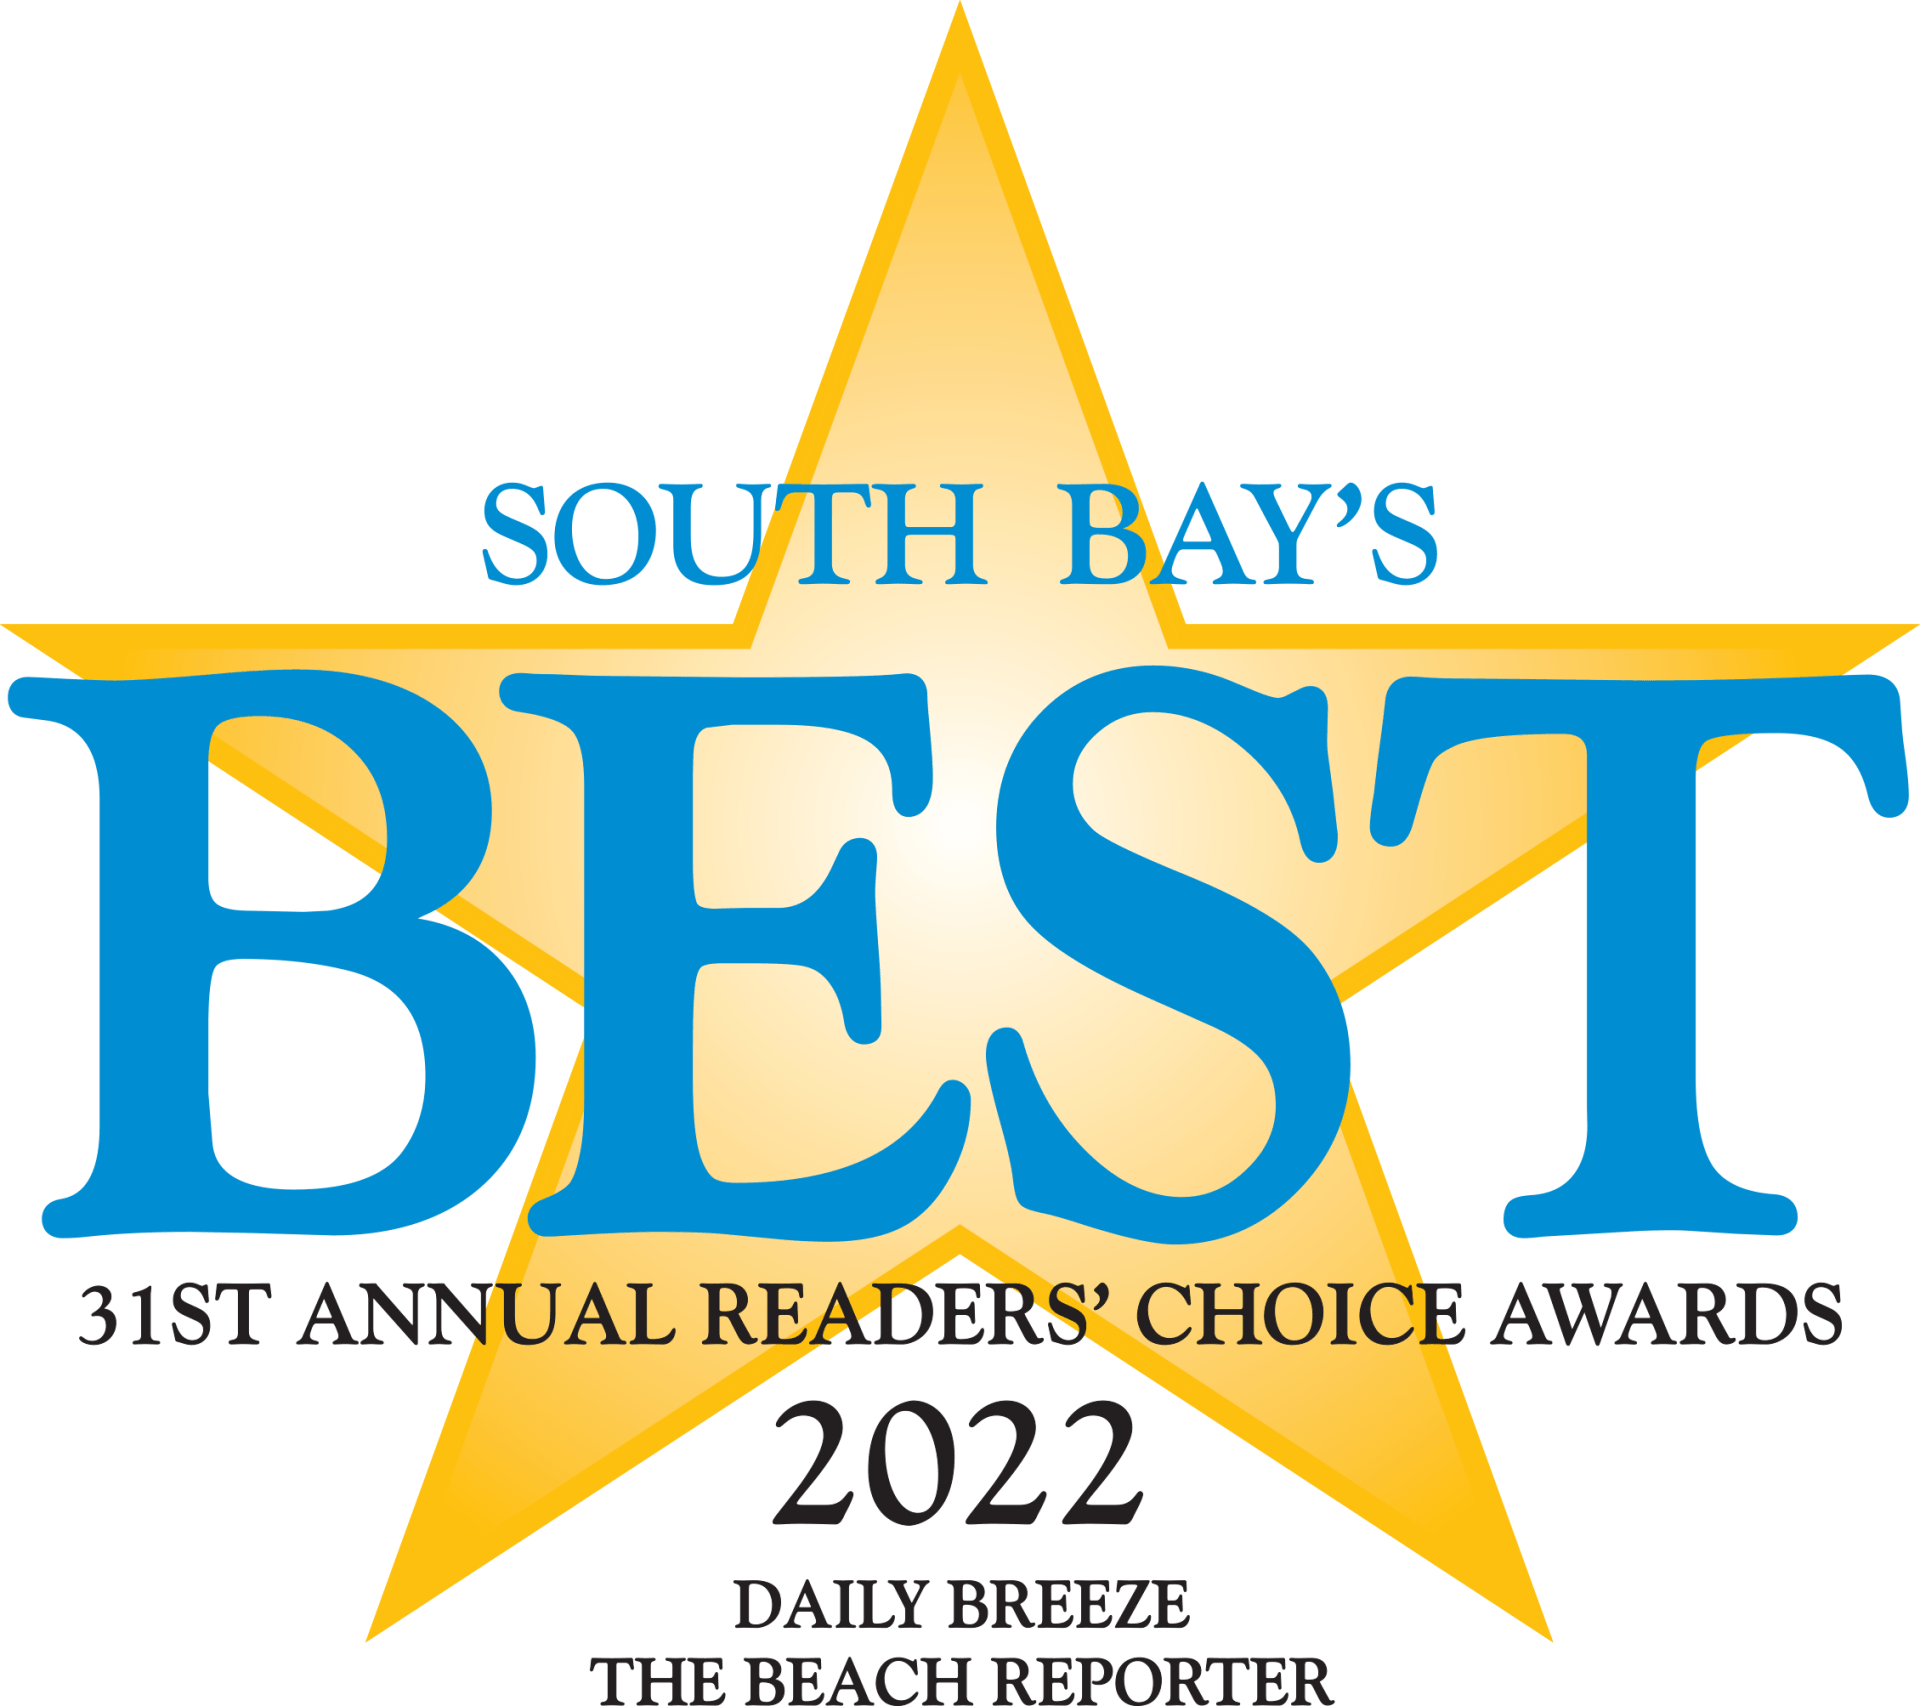 2022 South Bay's Best 31st Annual Readers' Choice Awards